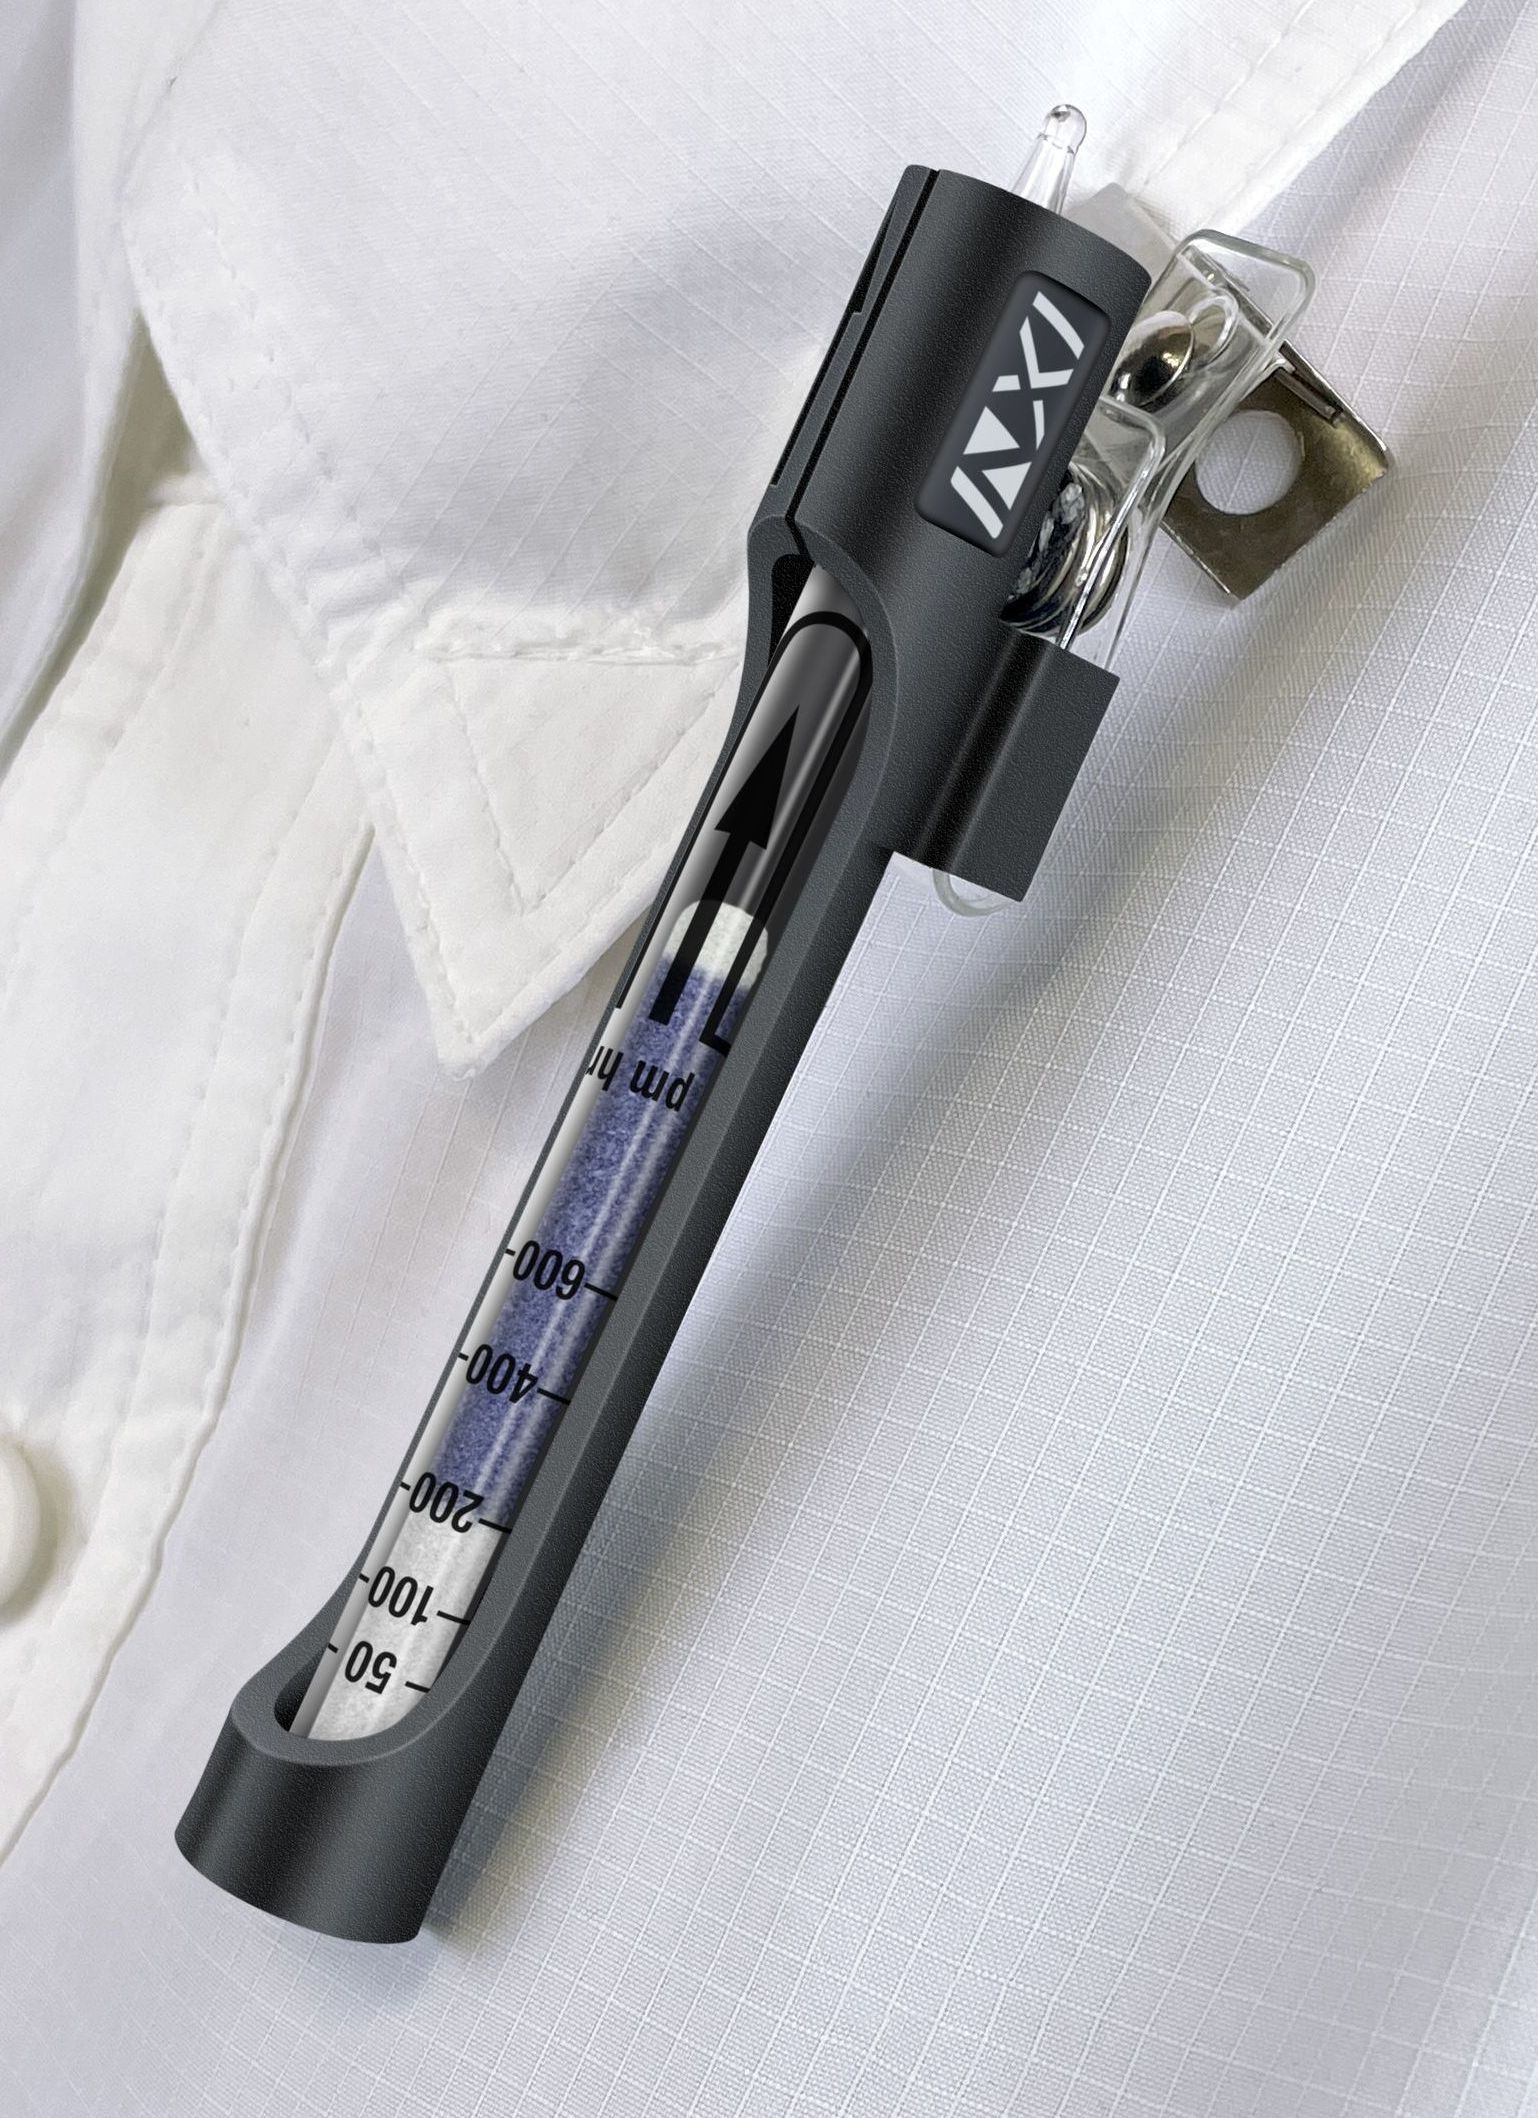 The Nextteq® dosimeter tube holder is clipped easily to workers’ clothing for true breathing zone measurements.